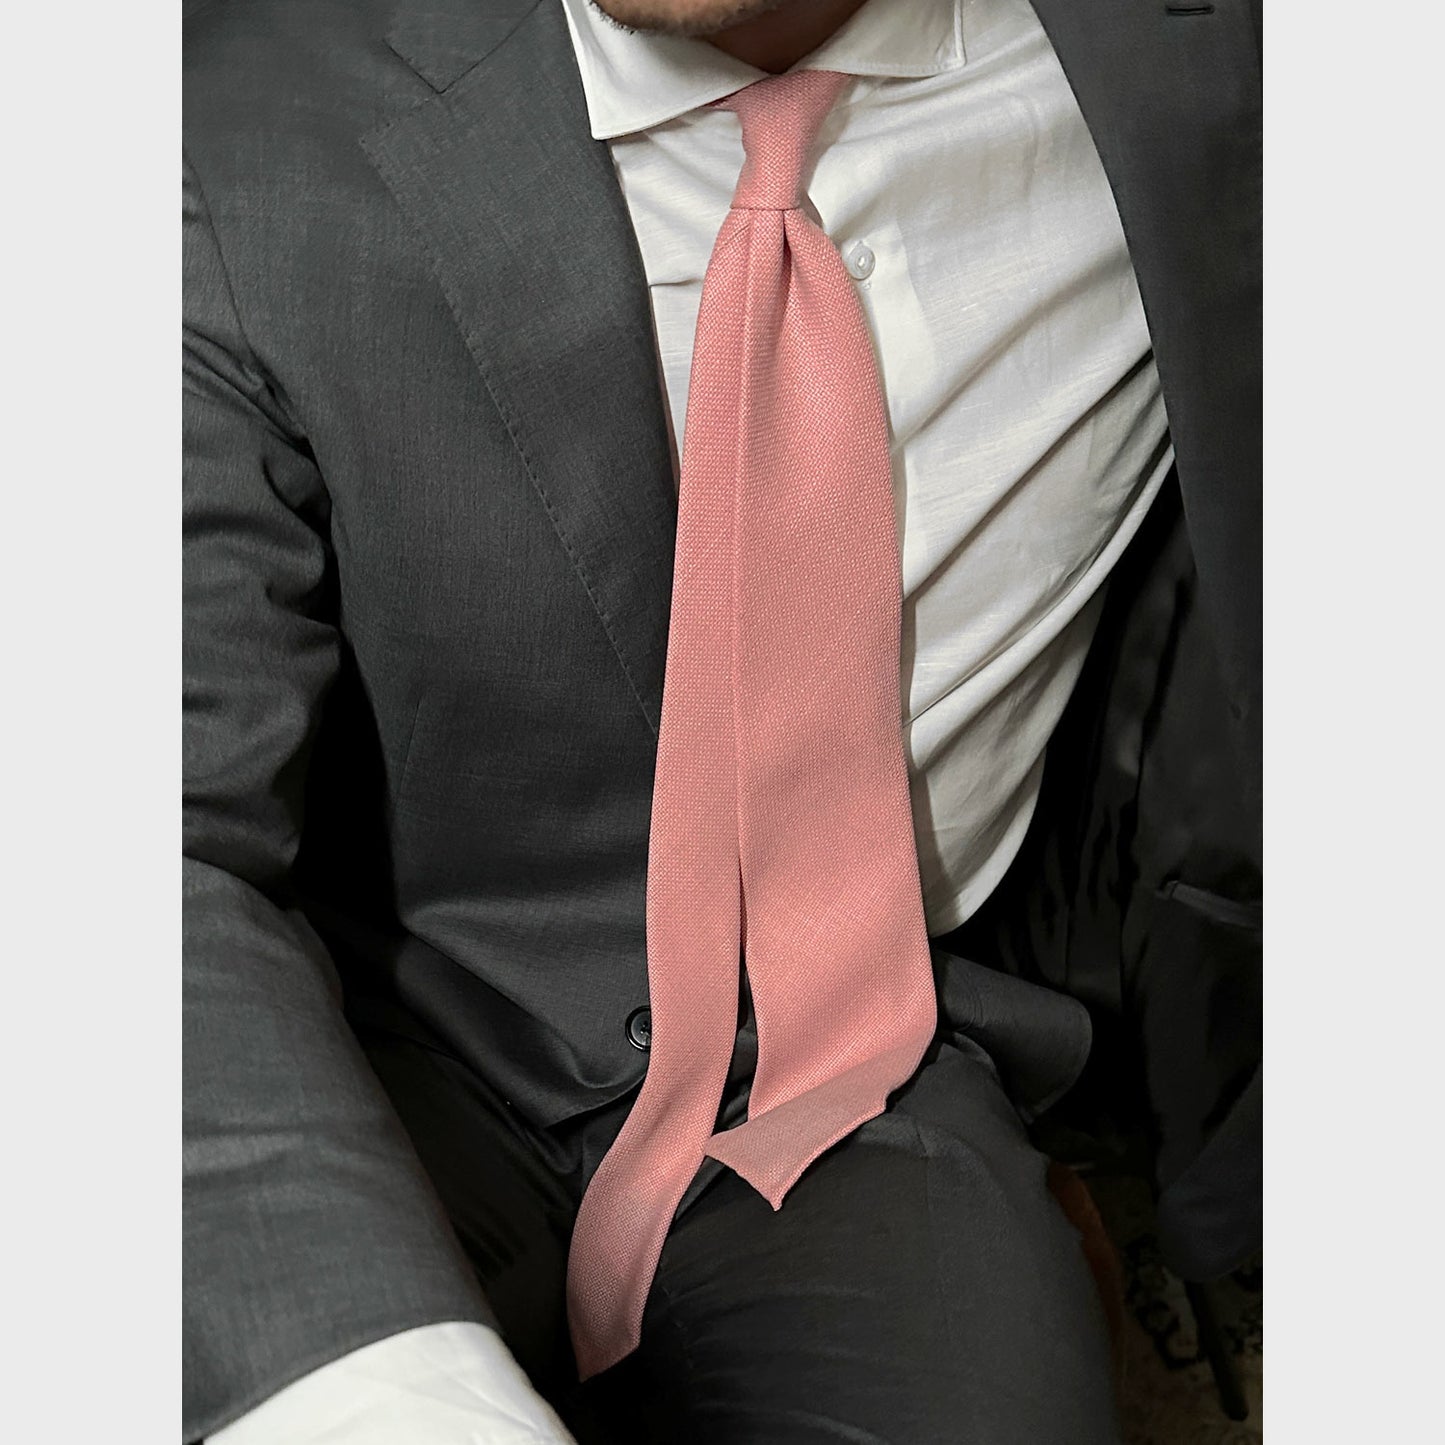 Load image into Gallery viewer, F.Marino Wool Tie 3 Folds Pink-Wools Boutique Uomo
